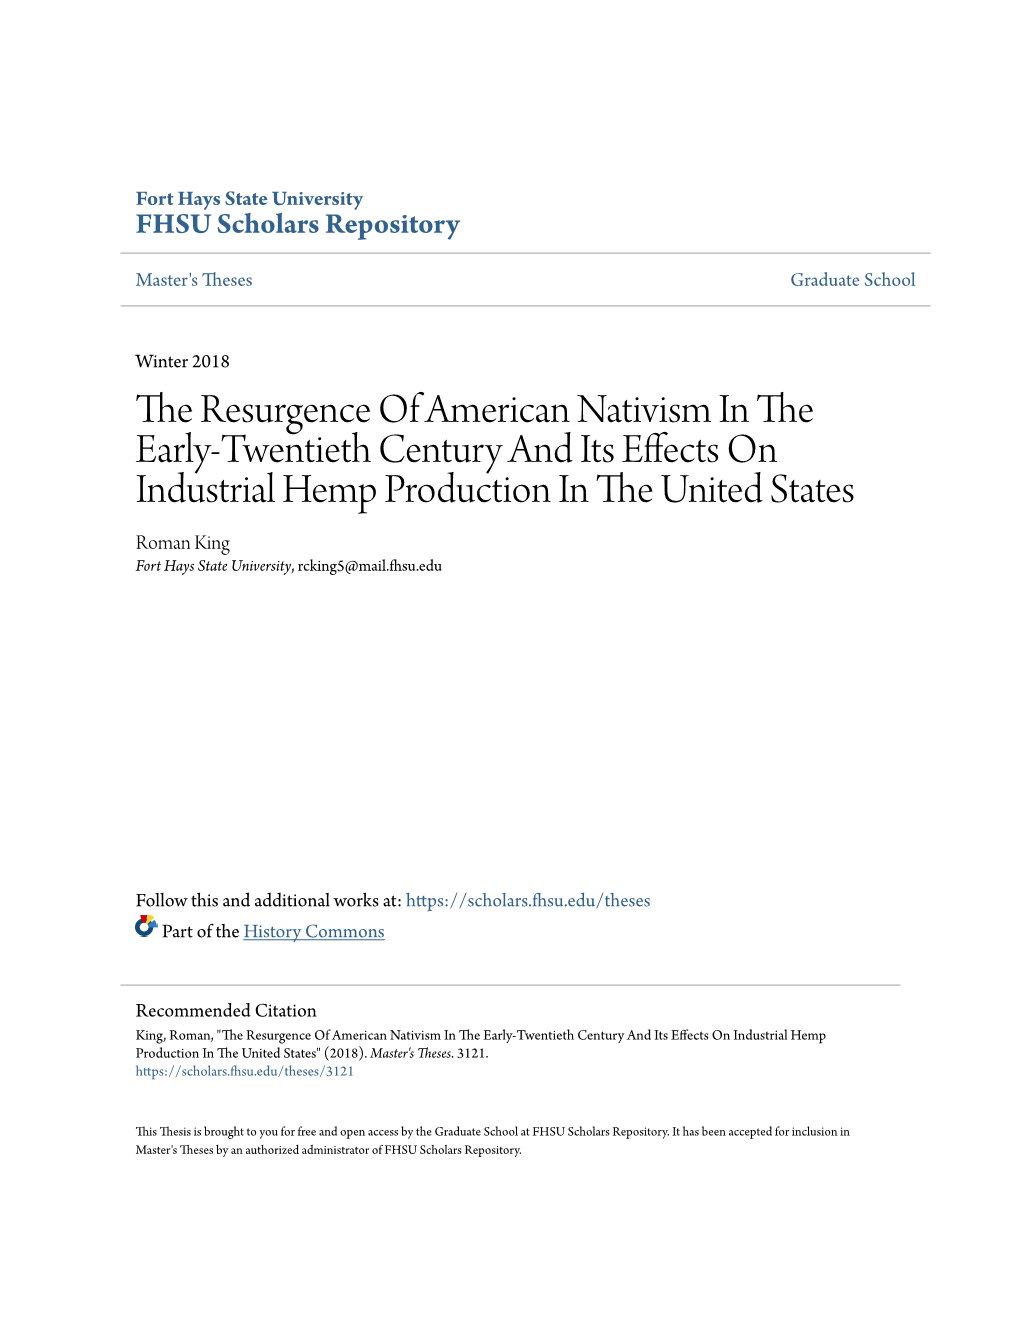 The Resurgence of American Nativism in the Early-Twentieth Century and Its Effects on Industrial Hemp Production in the United S